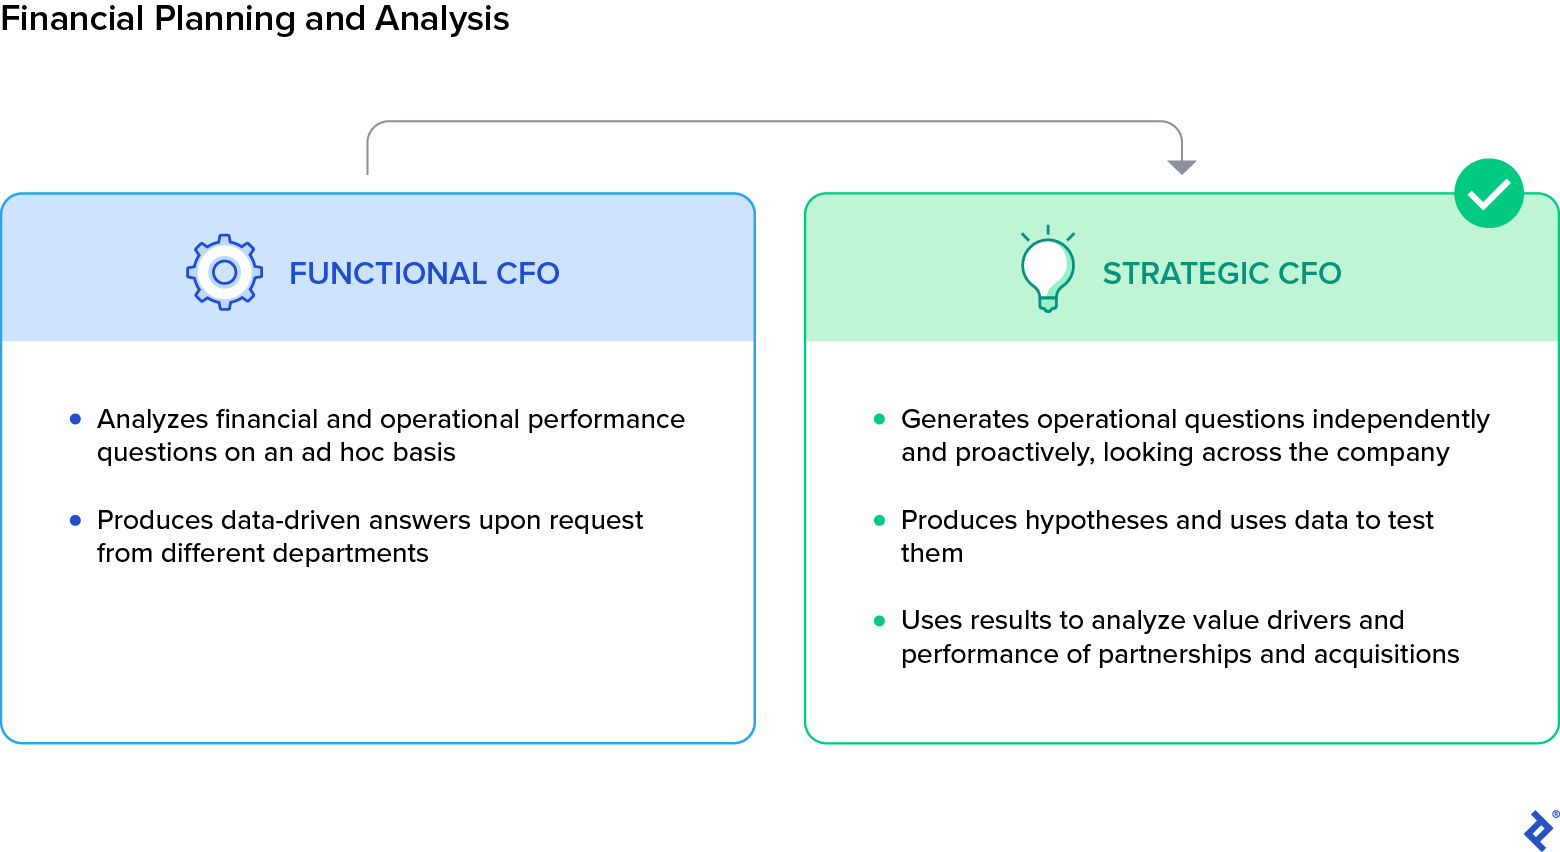 The functional CFO analyzes financial and operational performance on an ad hoc basis and produces data-driven answers upon request. The strategic CFO generates operational questions proactively and independently, produces hypotheses and tests them, and uses results to analyze value drivers and performance of partnerships and acquisitions.